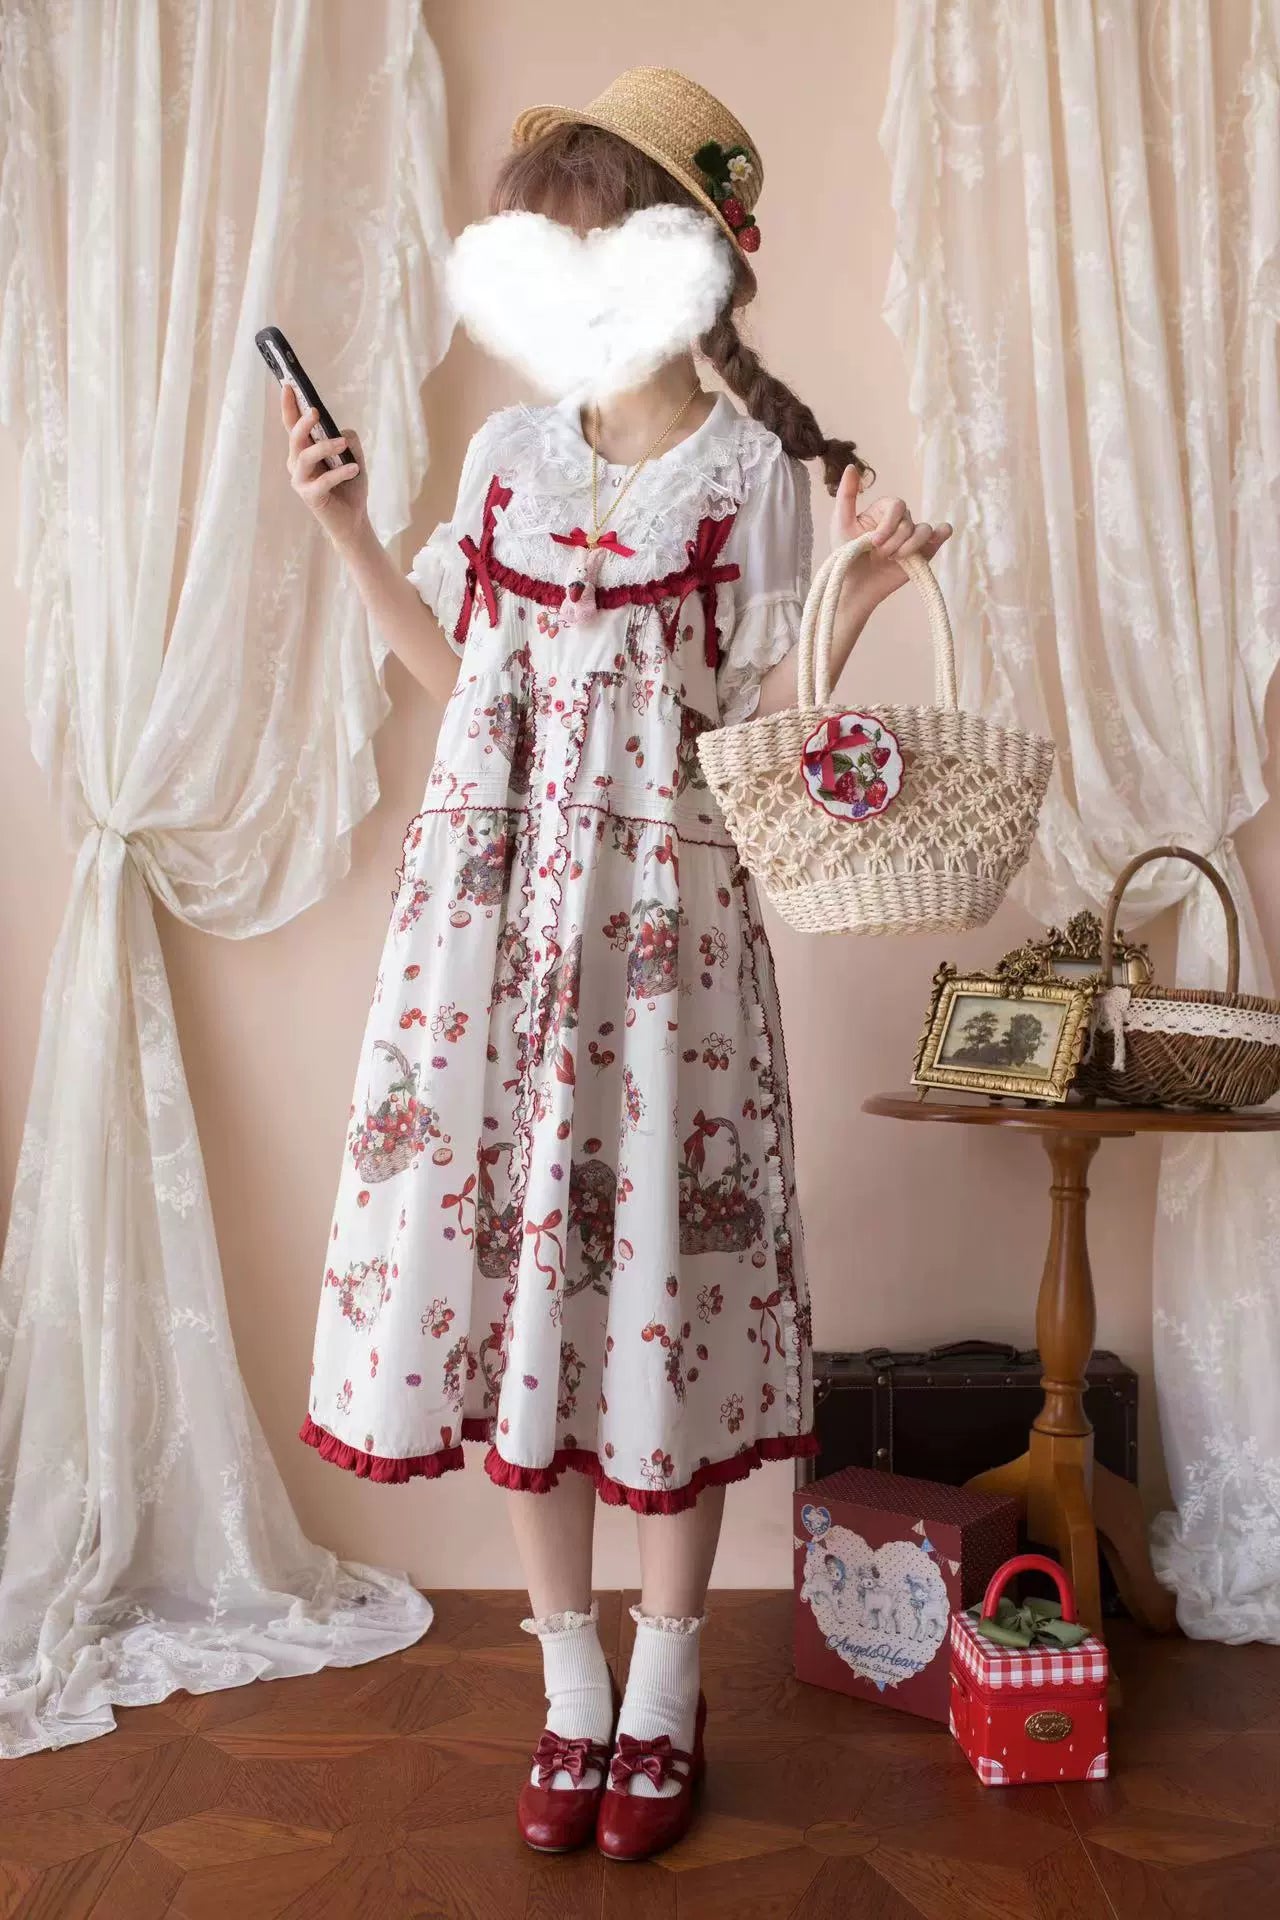 [Sales period ended] Picnic Basket jumper skirt in strawberry pattern